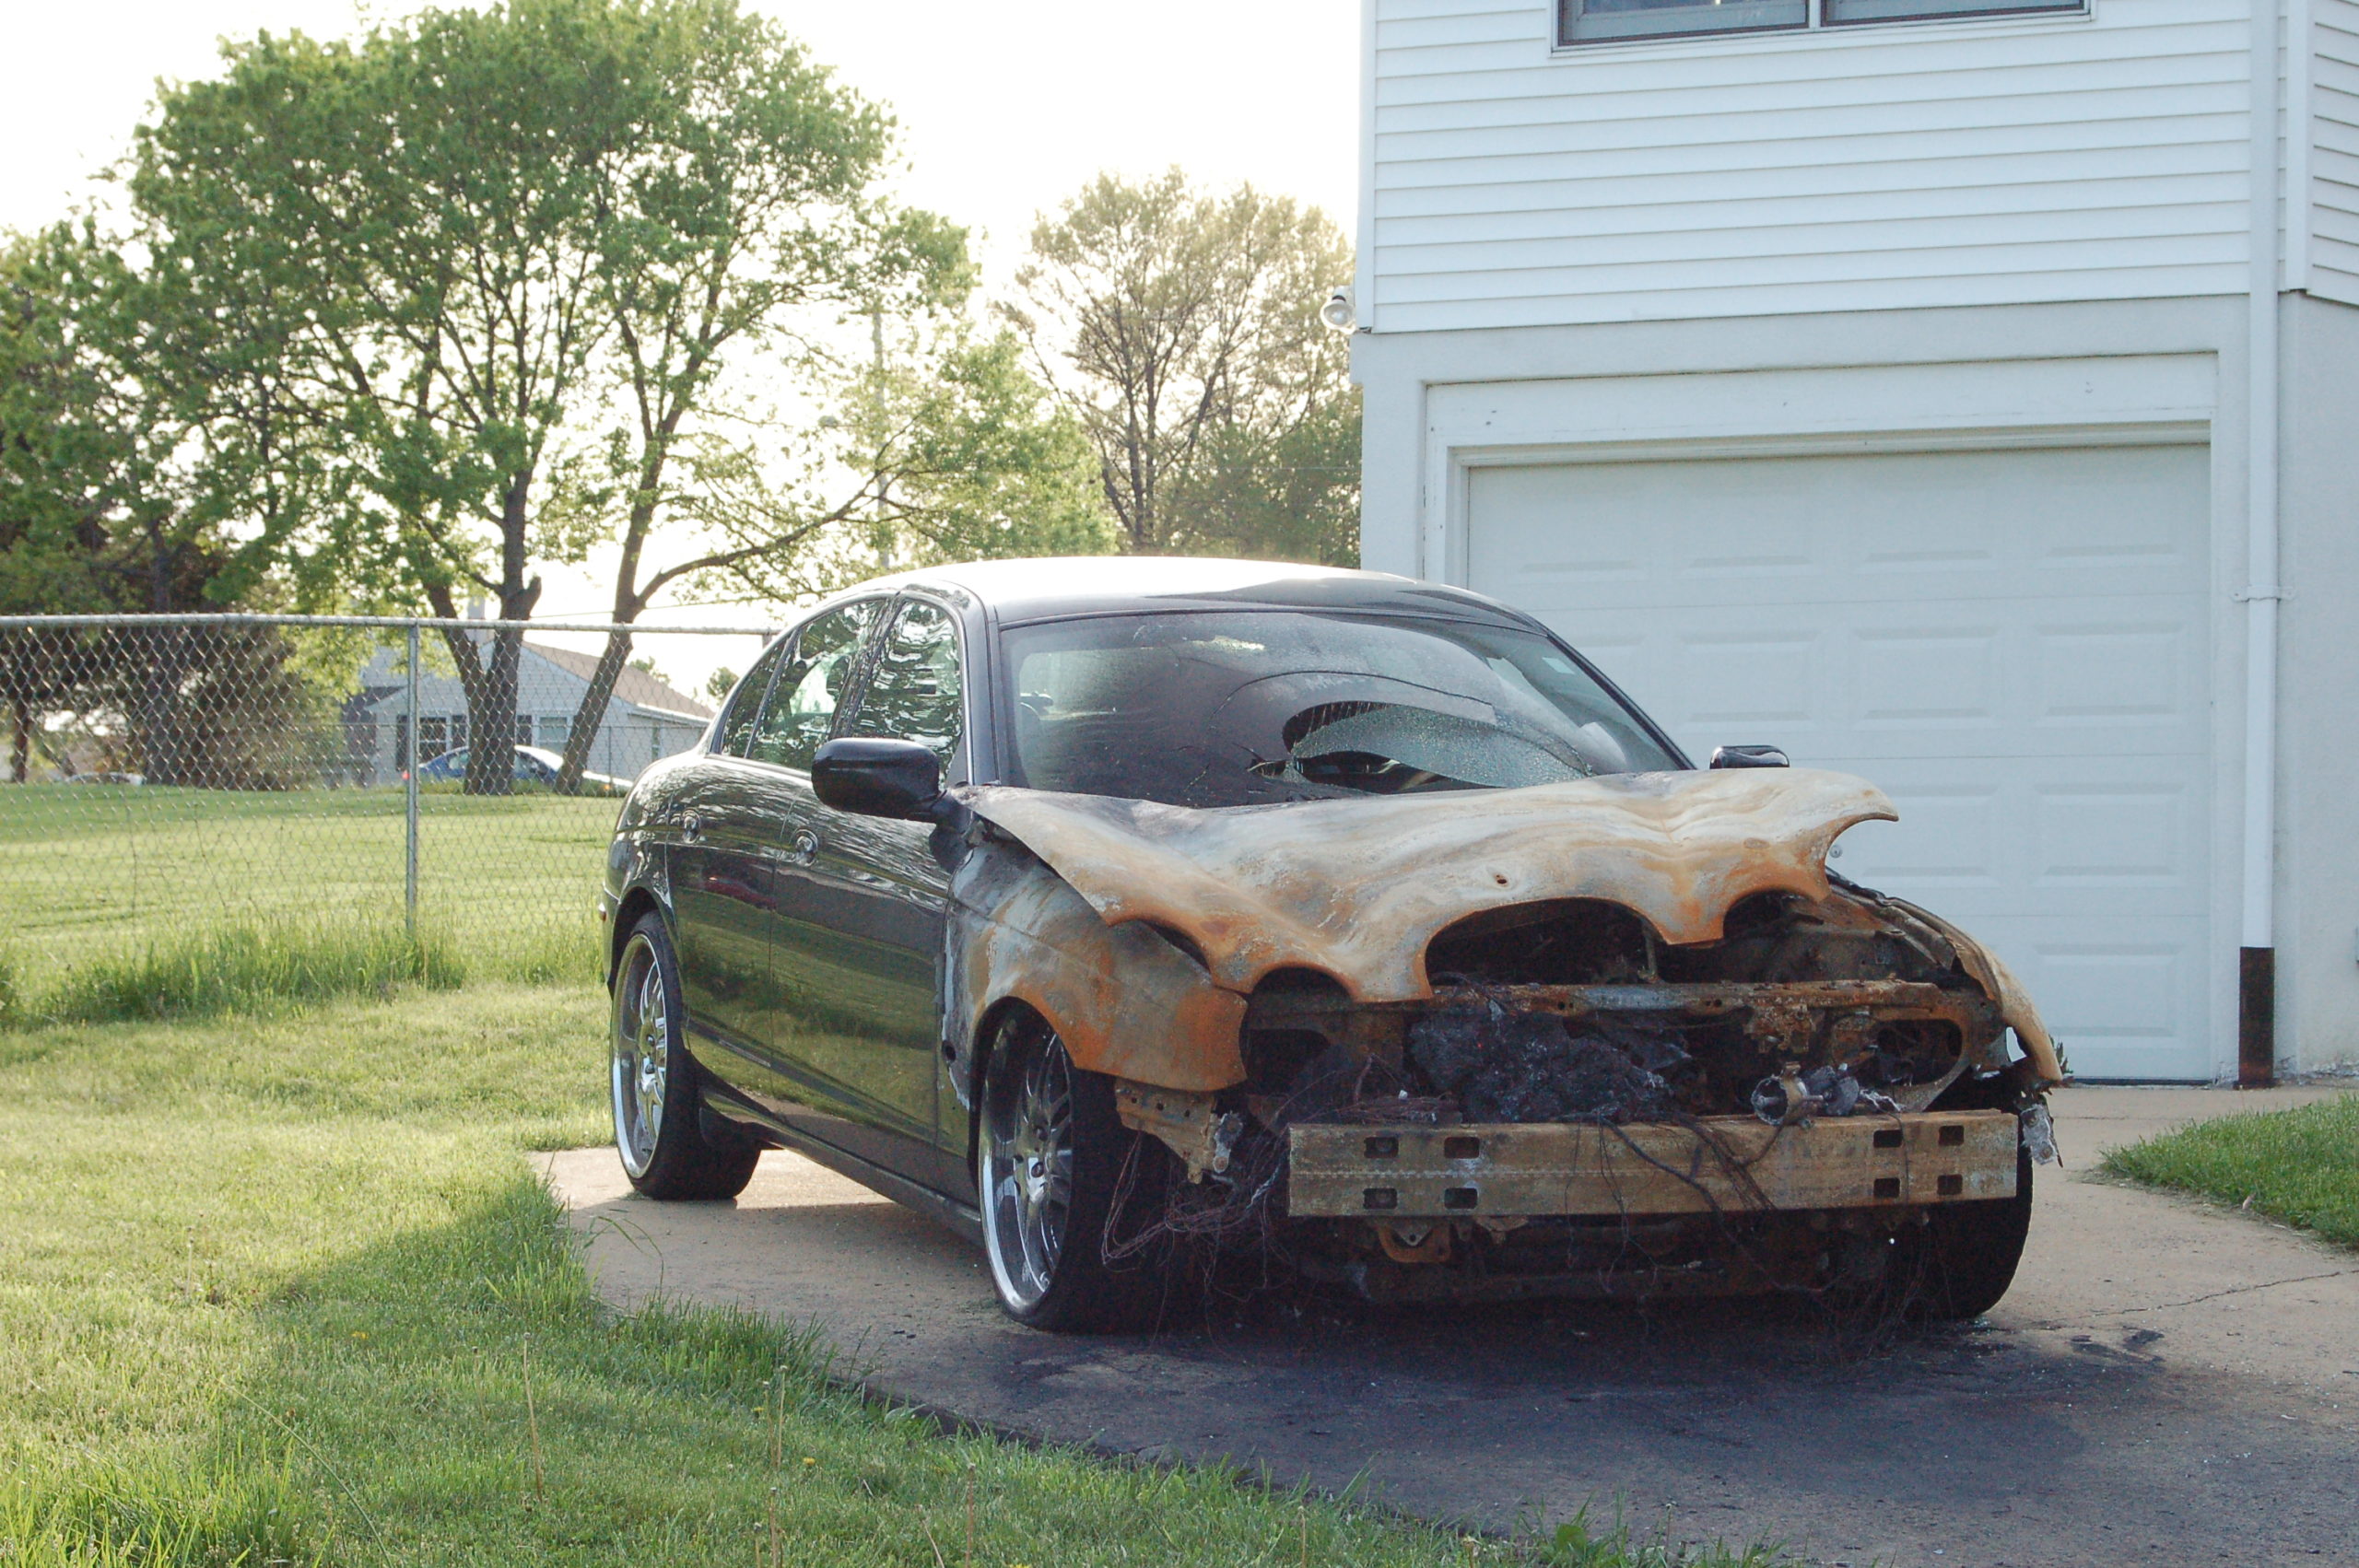 Cash For Junk Cars in Appleton, WI- Professional Junk Car Buyers, FREE REMOVAL!